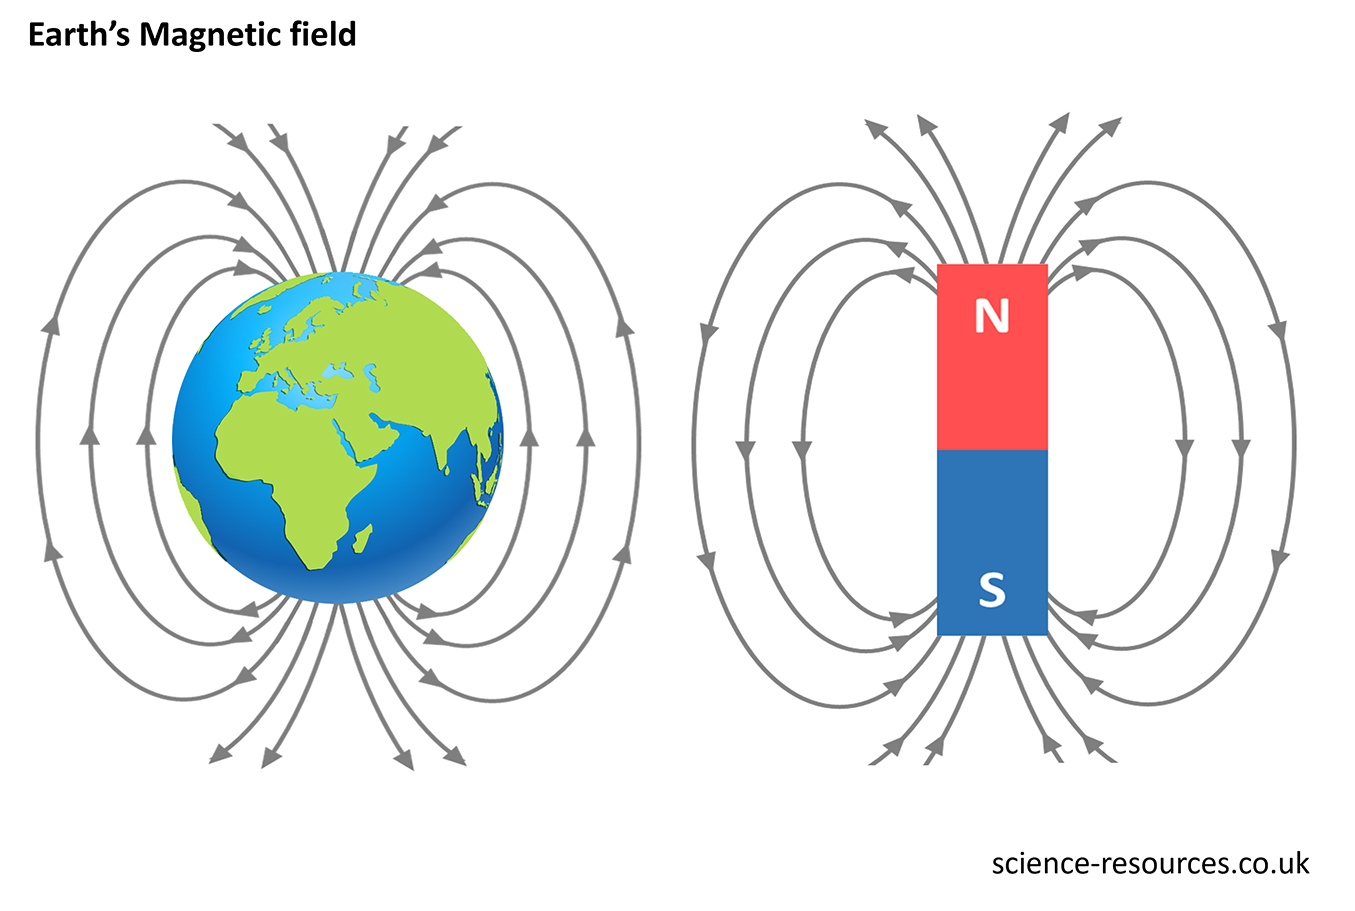 The image you sent is a diagram showing Earth’s magnetic field. It compares Earth’s magnetic field to that of a bar magnet. Both have similar shapes and directions of their magnetic fields. 